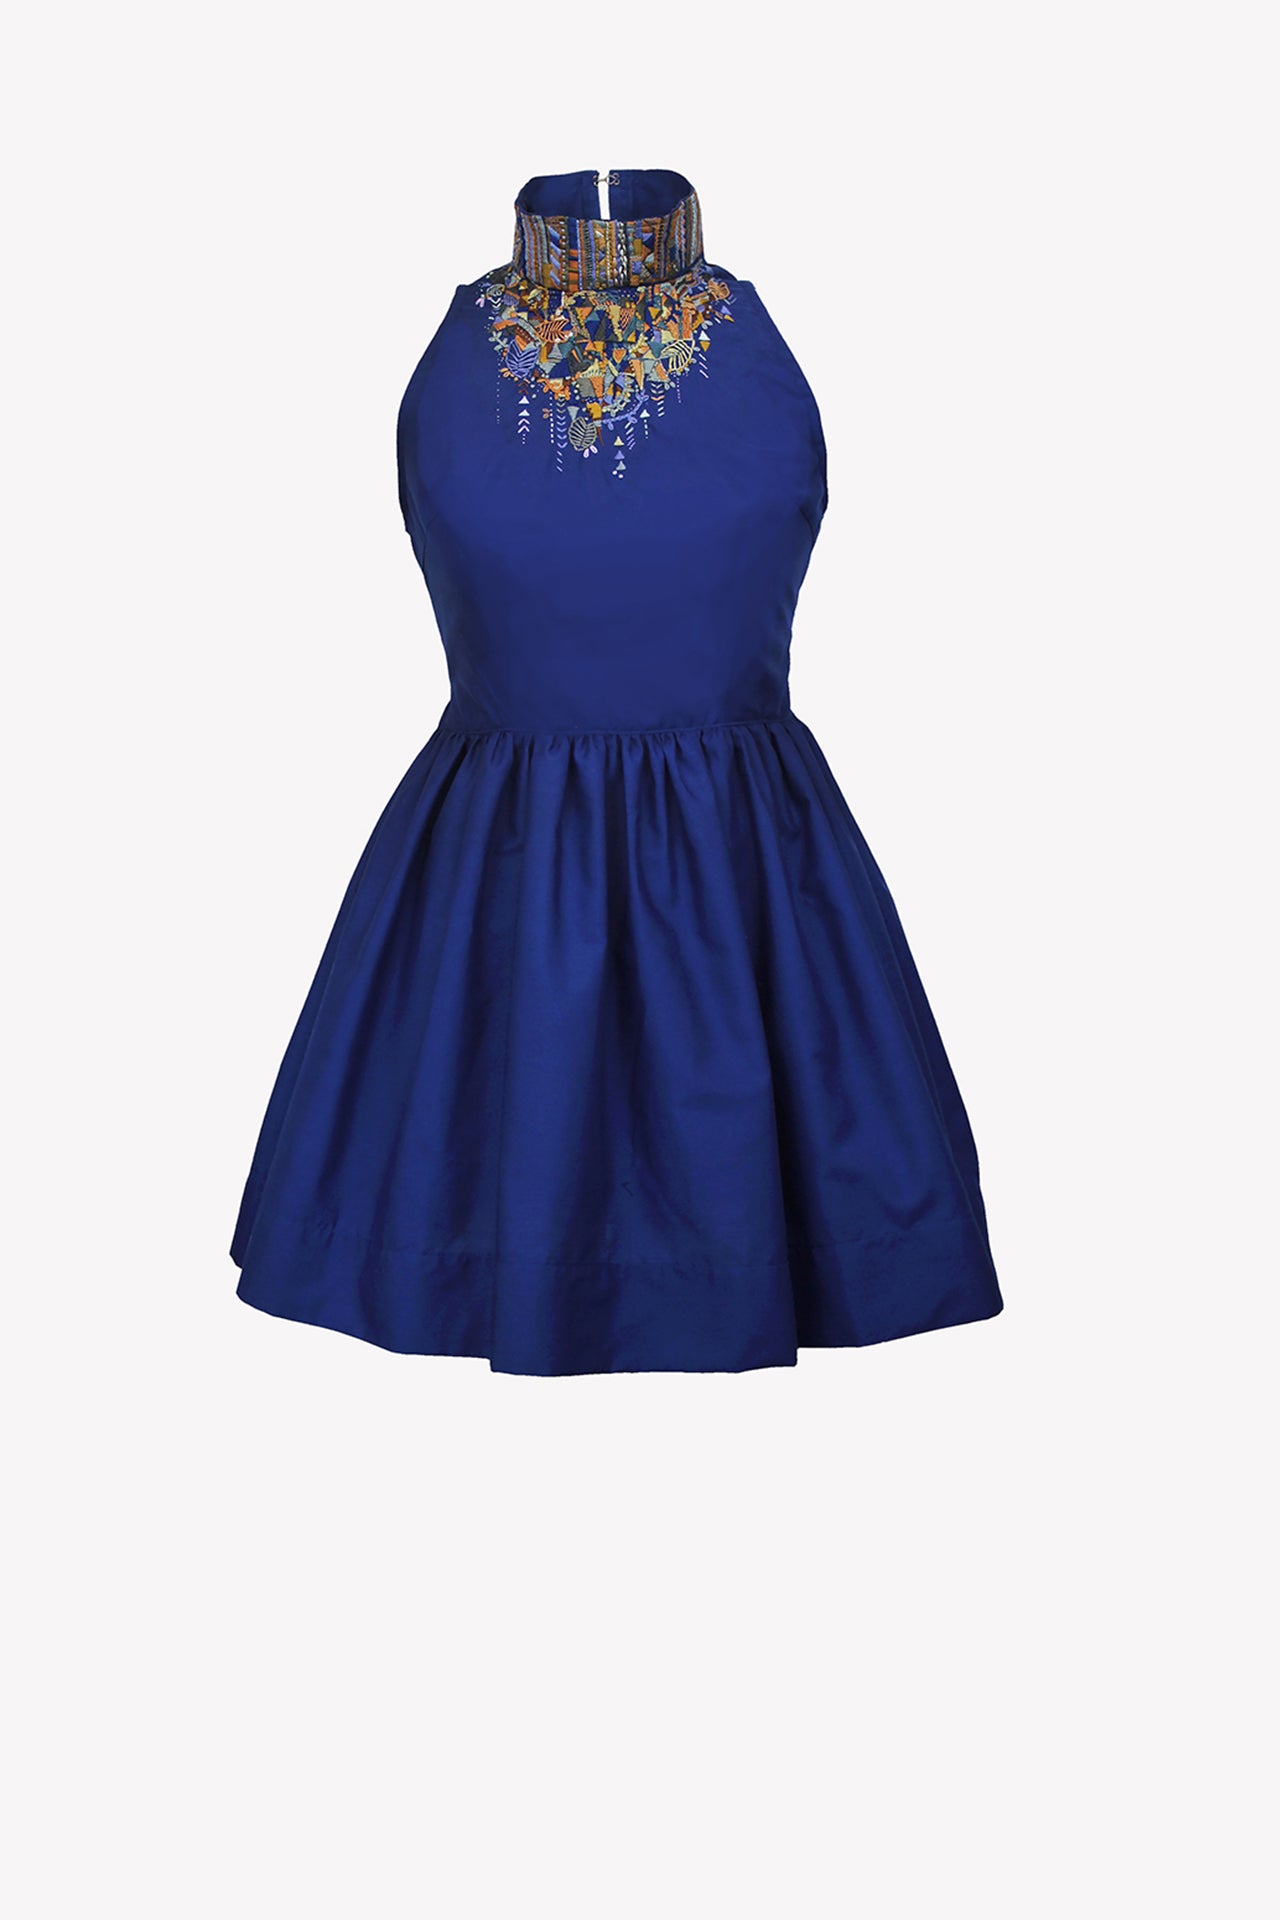 Navy blue dress with hand embroidery